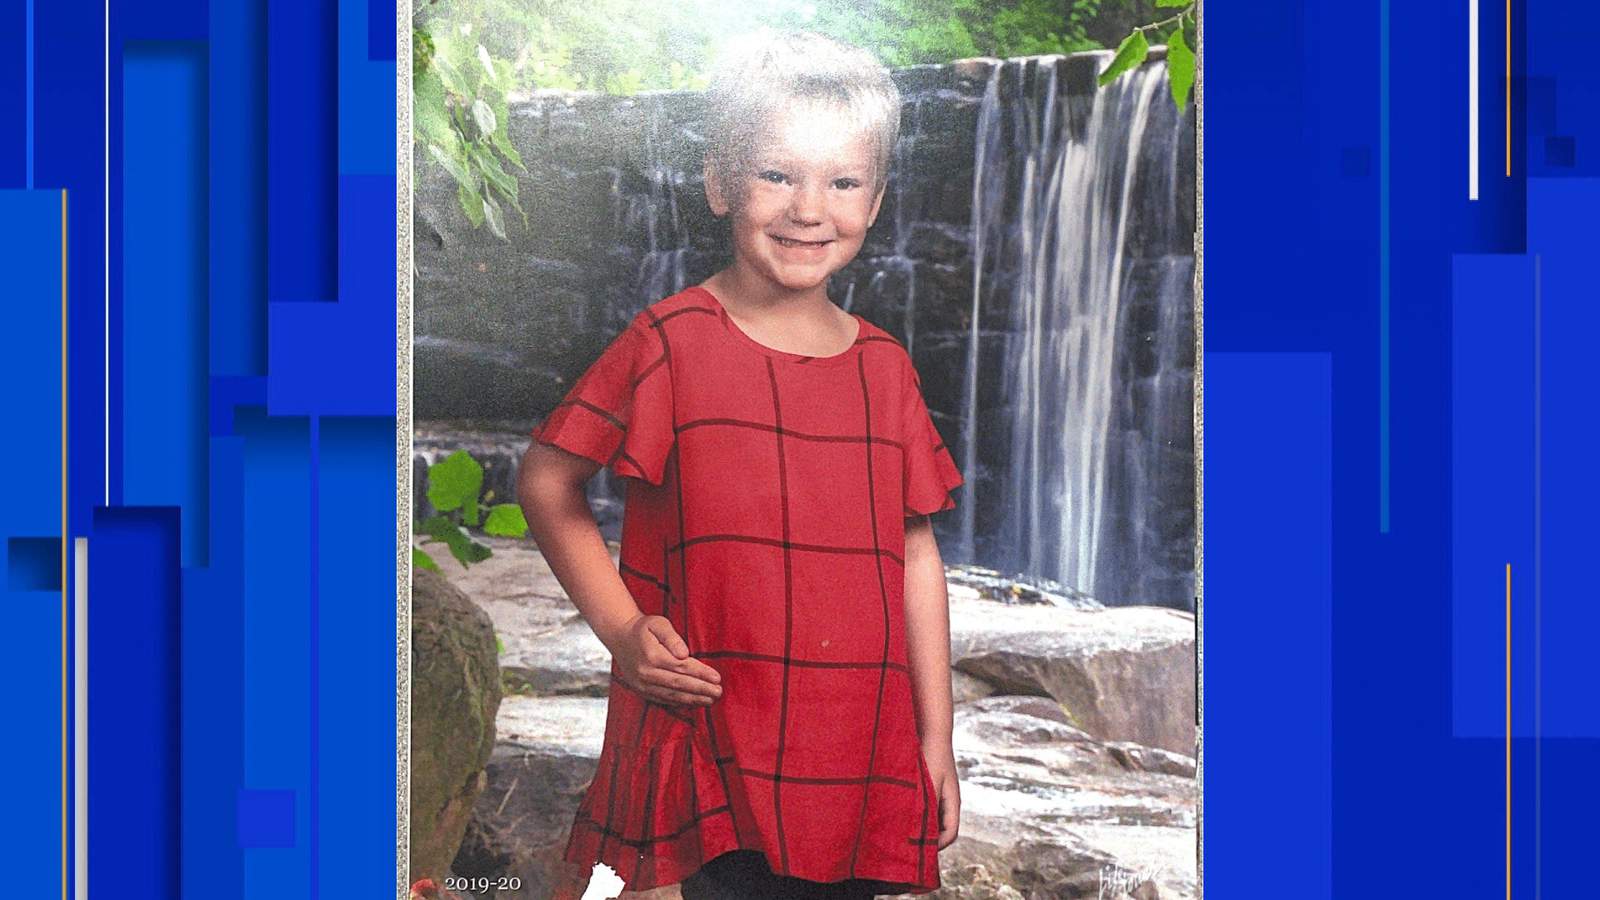 Lincoln Park police looking for endangered child last seen with